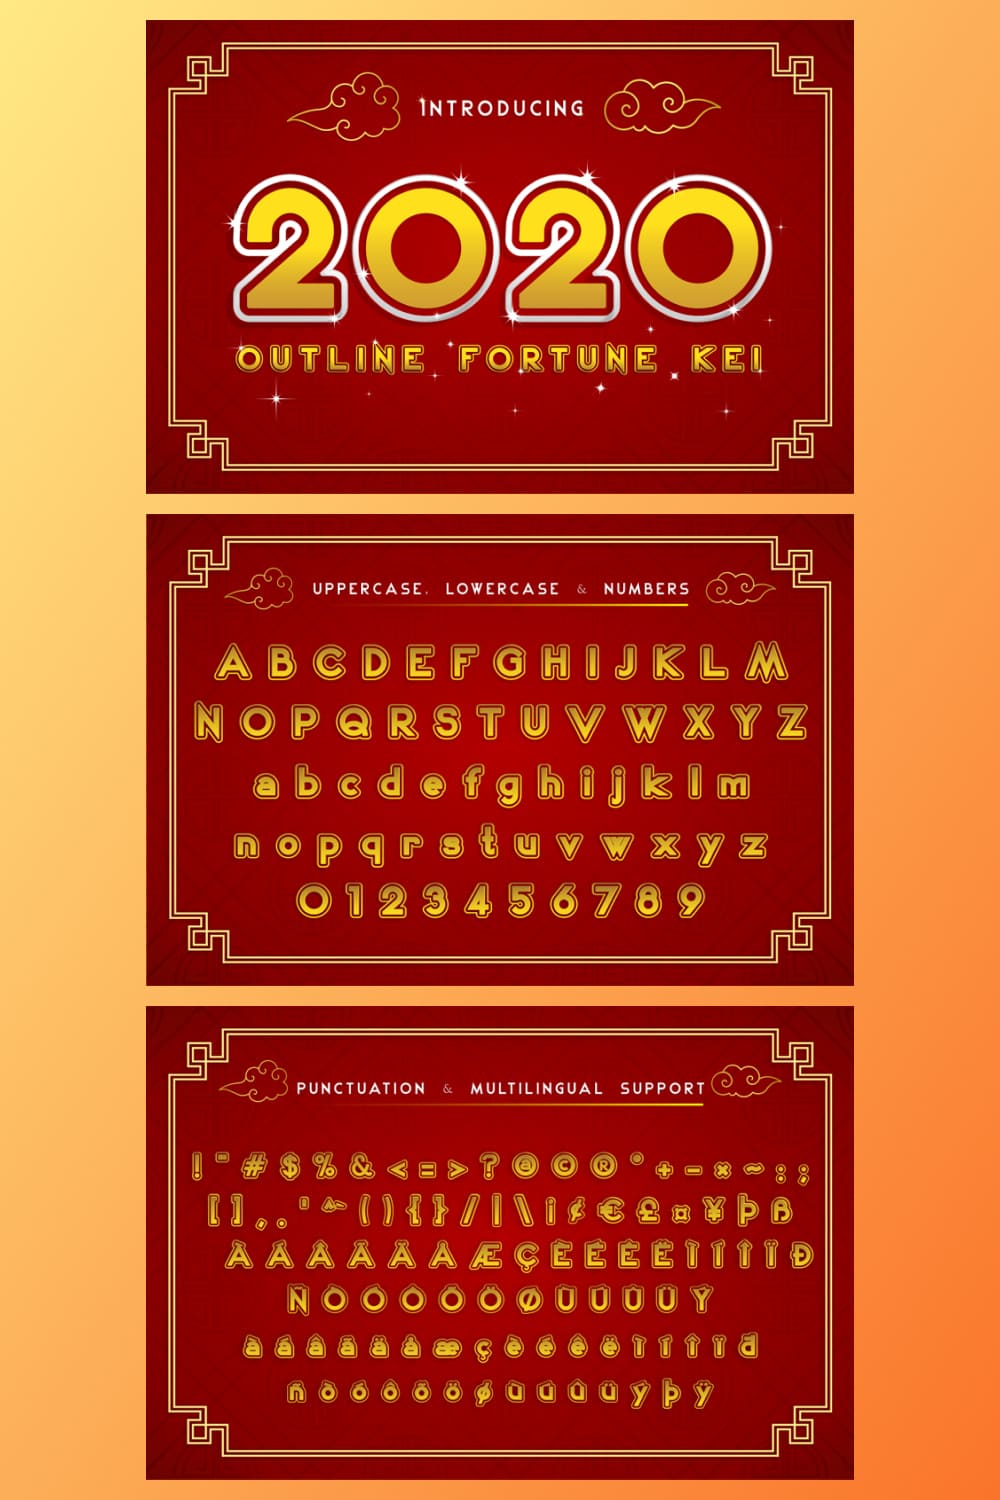 This is a new font look with the feel of a new 2020 year full of fortune with an outline style, perfect for an extraordinary new year's project.